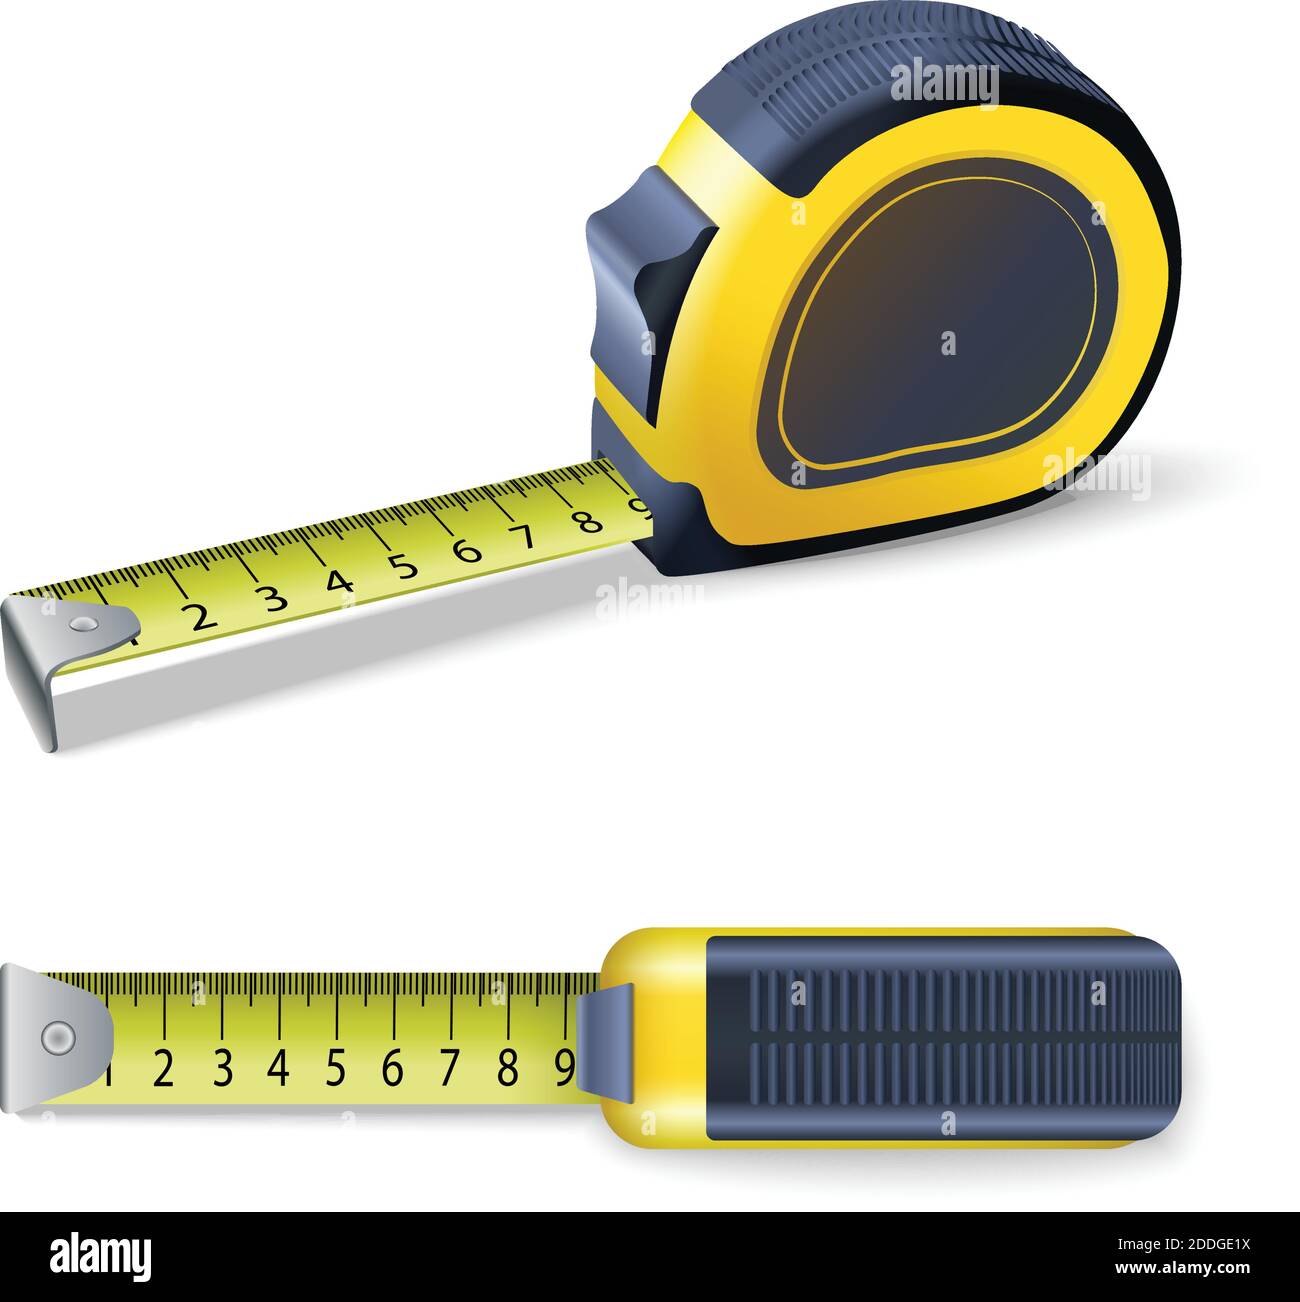 6,470 Measuring Tape Cm Images, Stock Photos, 3D objects